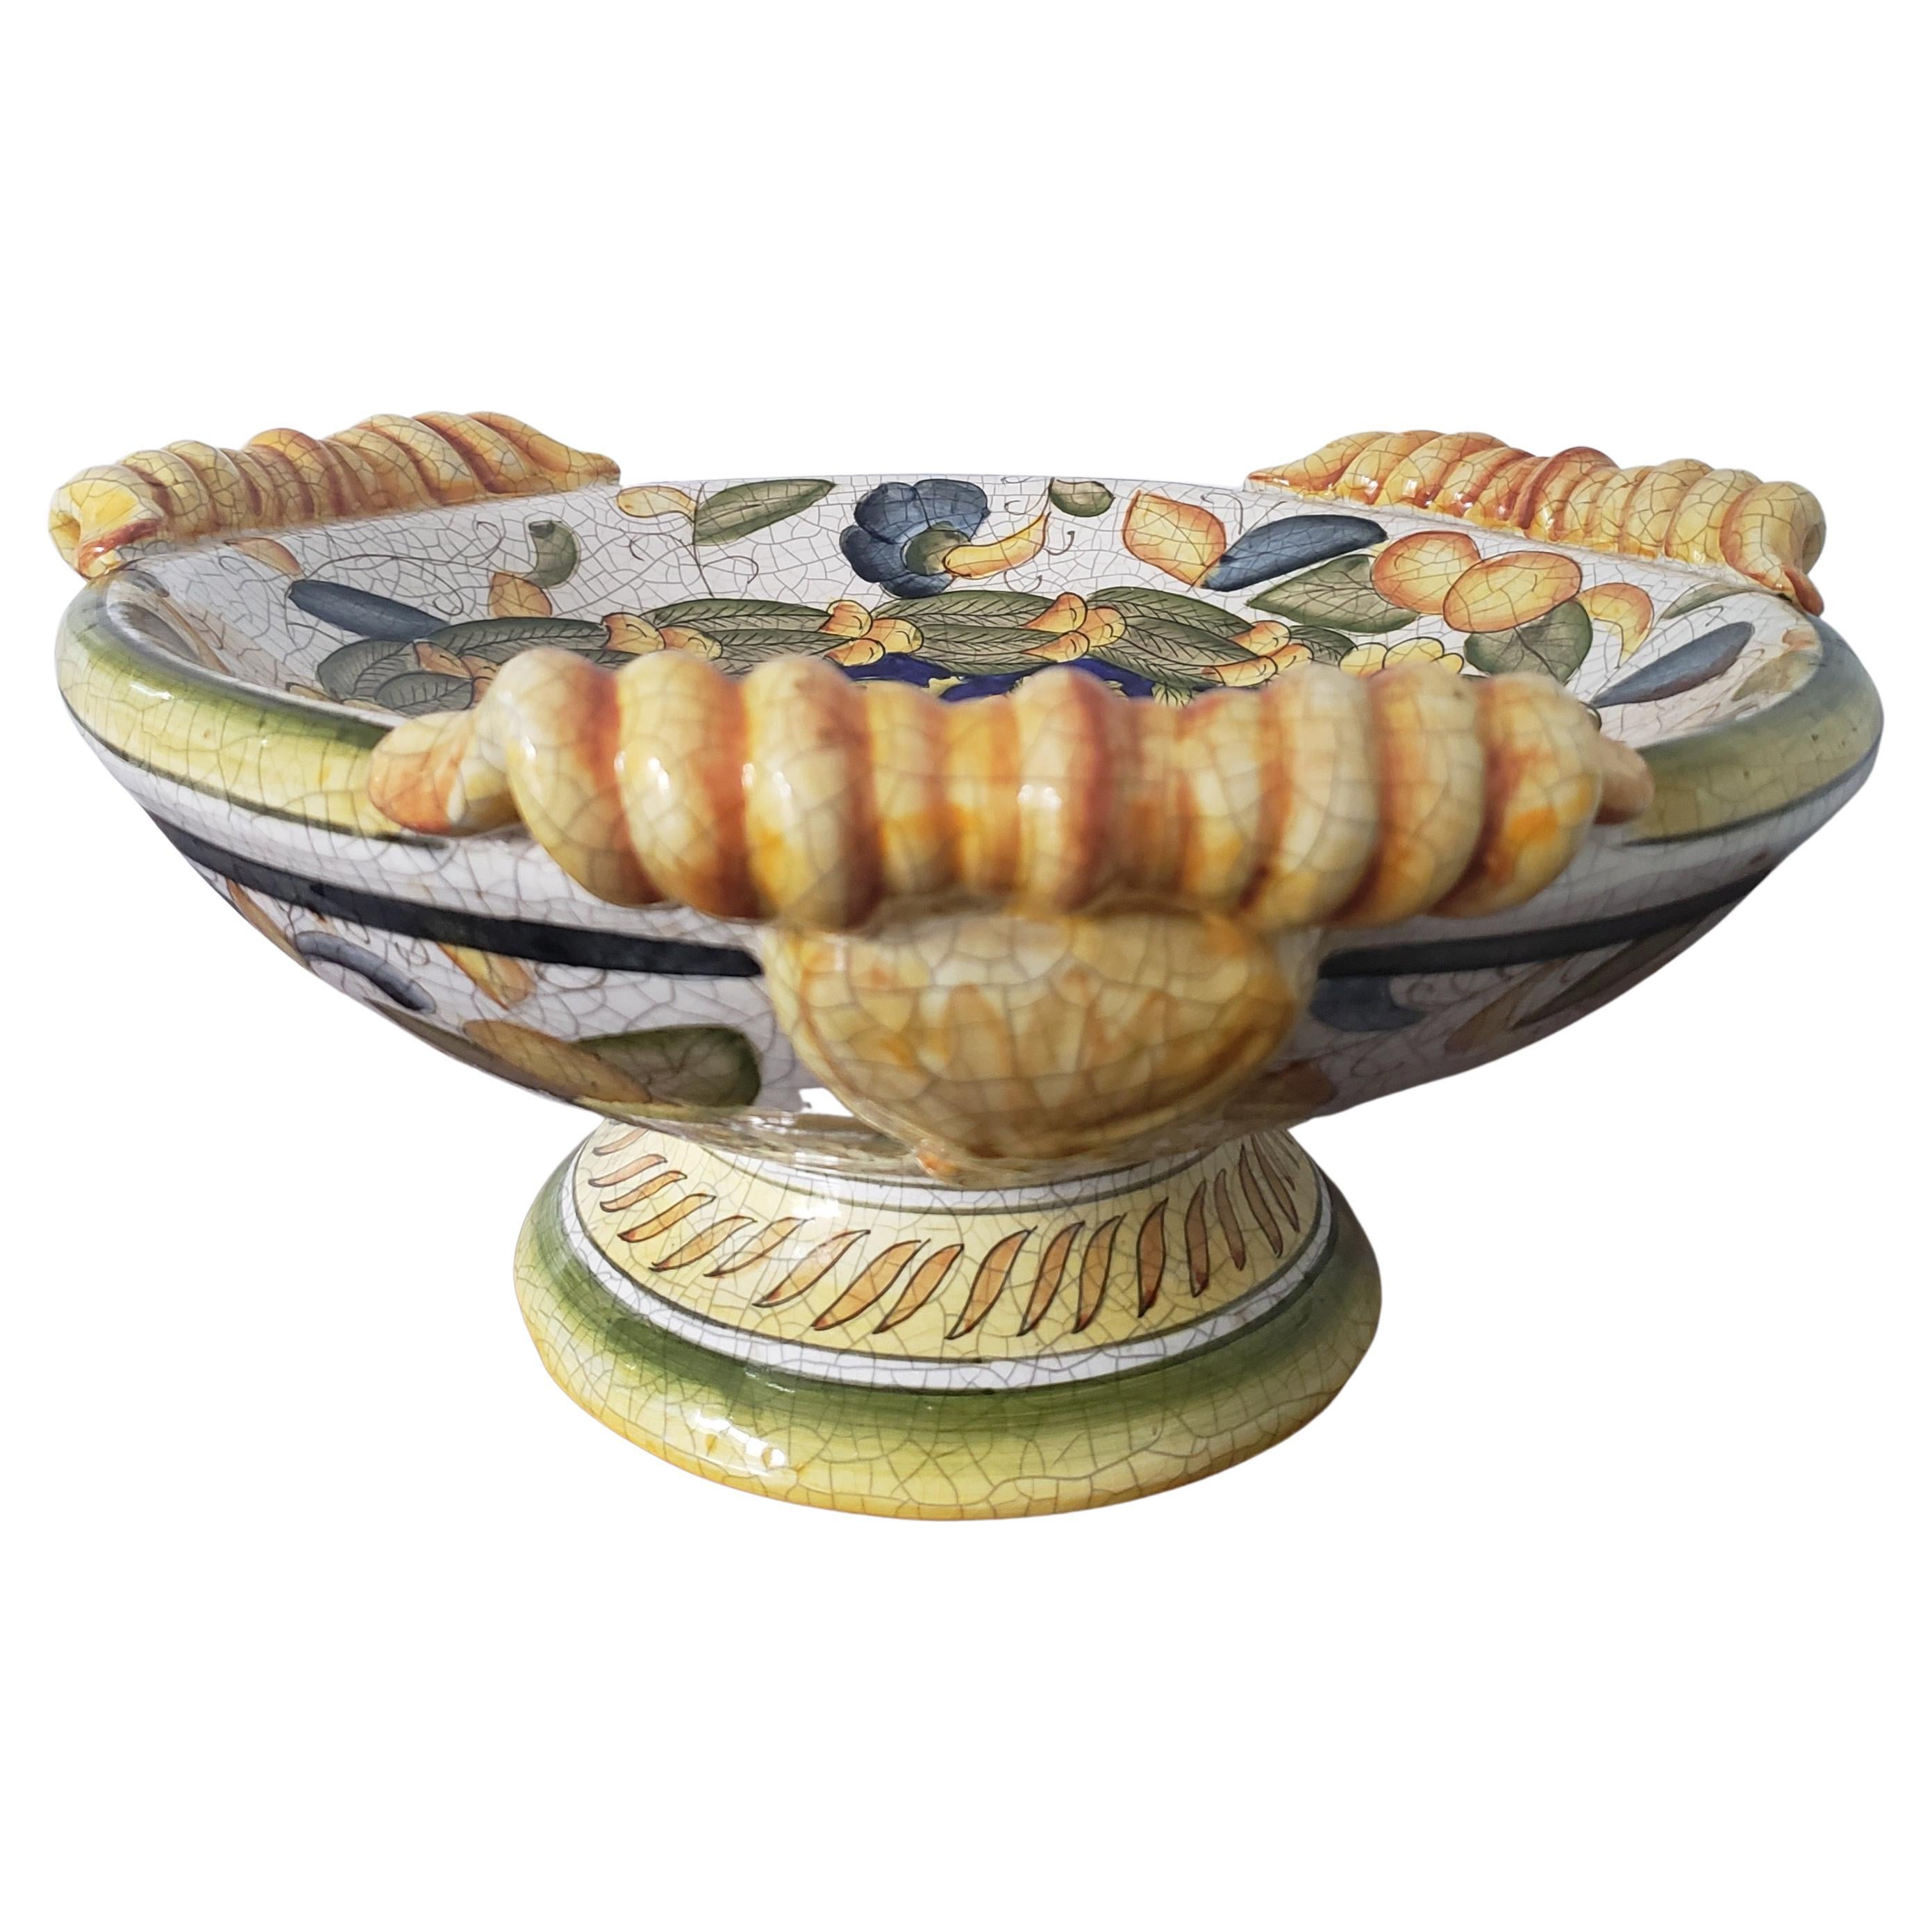 Remarkable vintage Chinese Majolica centerpiece amazing details and crackled look finish. Use this beauty to amaze your visitors. Majolica prices are amazing with their stunning color palettes and attention to details. Very collectible as well.